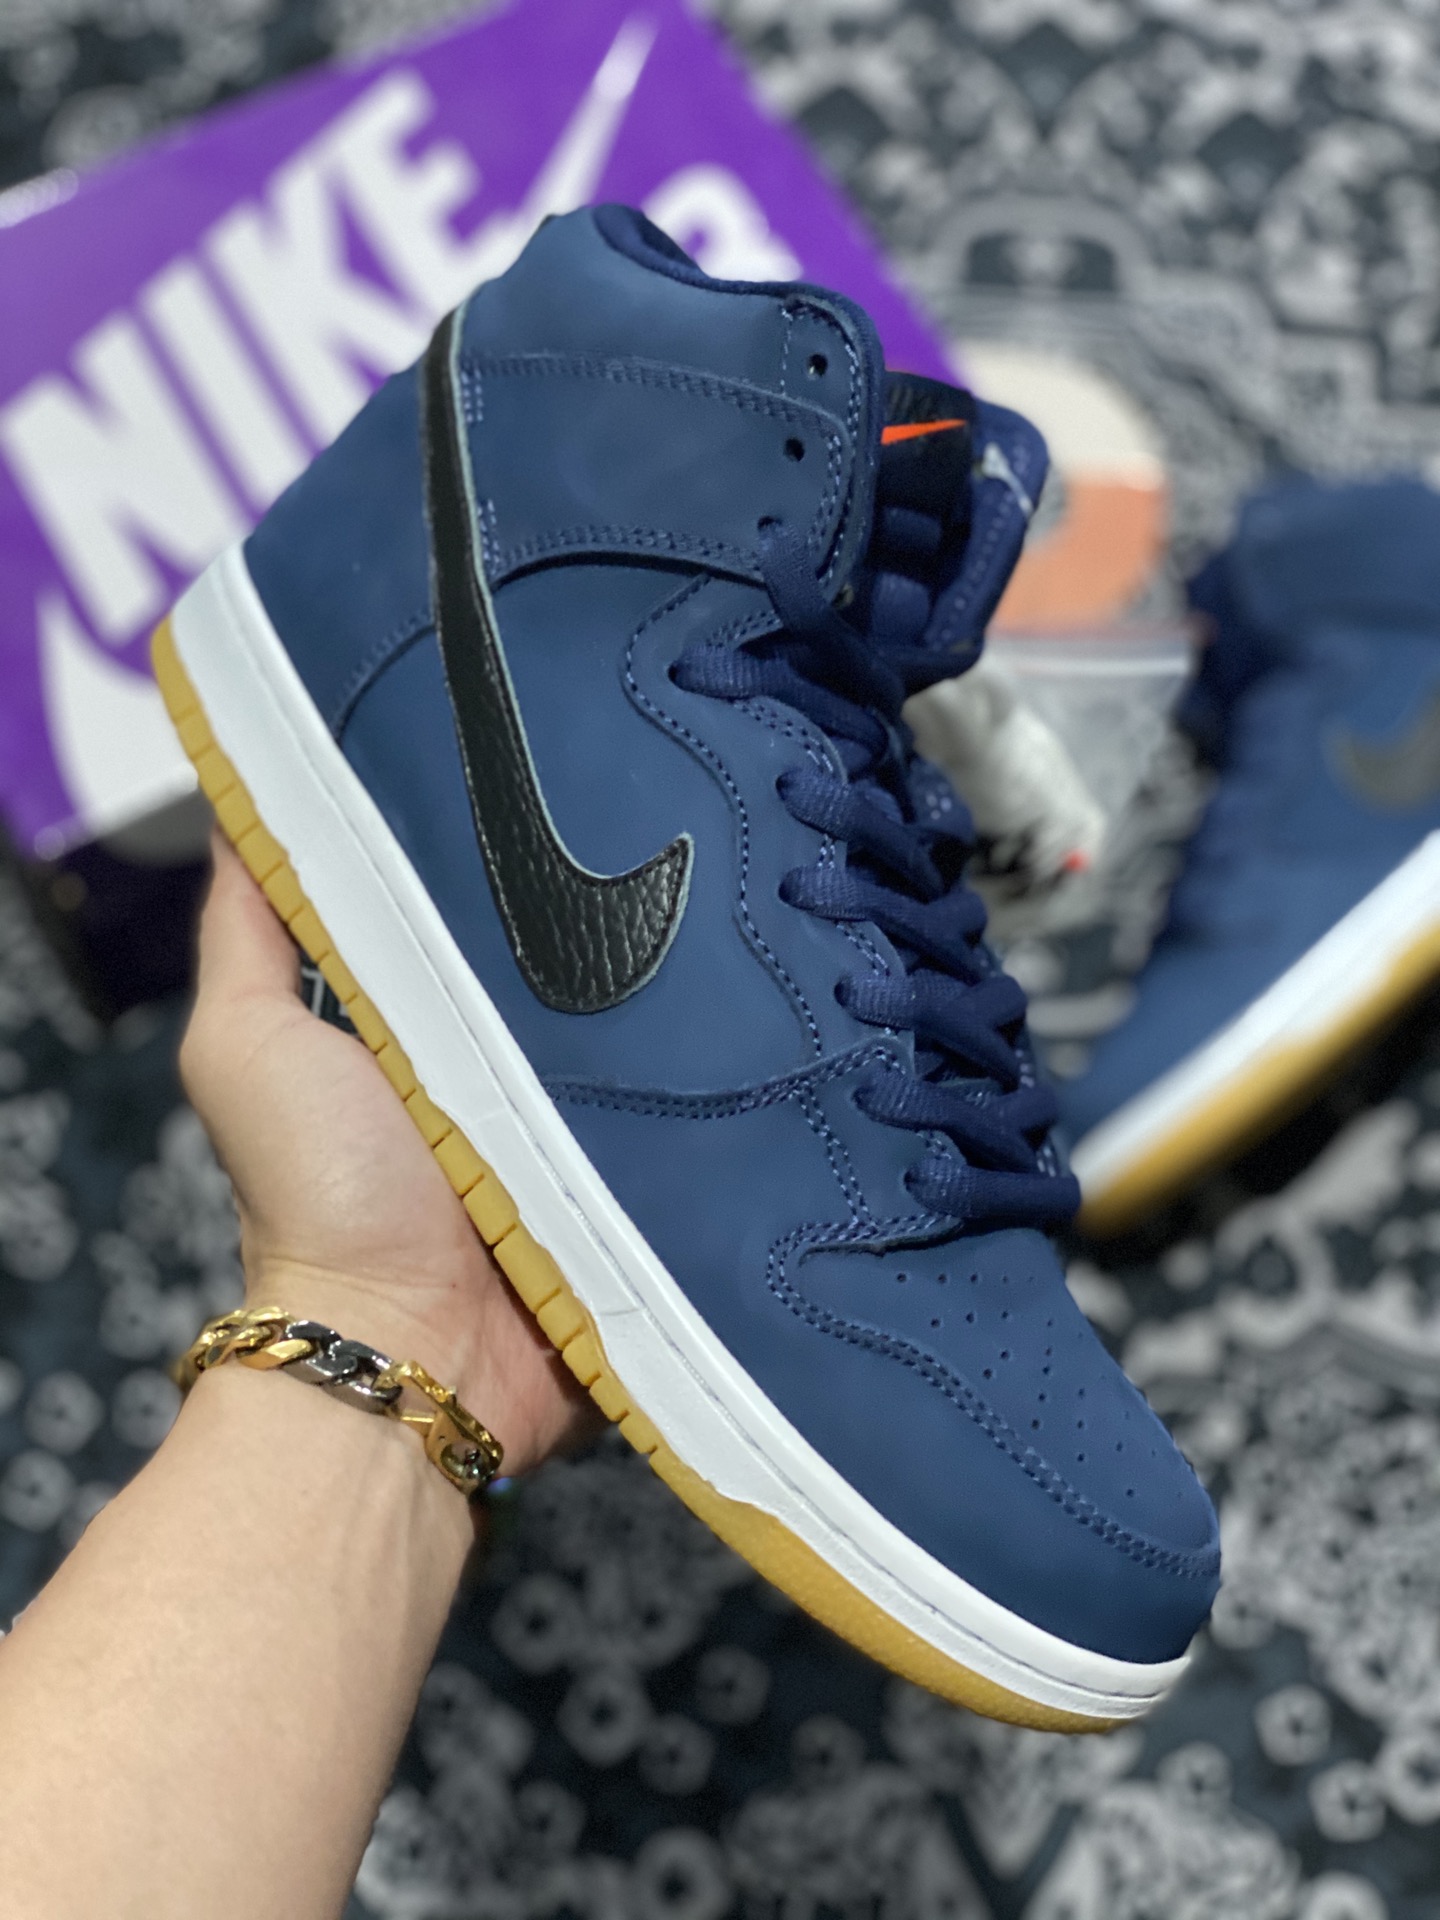 Nike SB Dunk High Pro ISO Midnight Navy Shoes